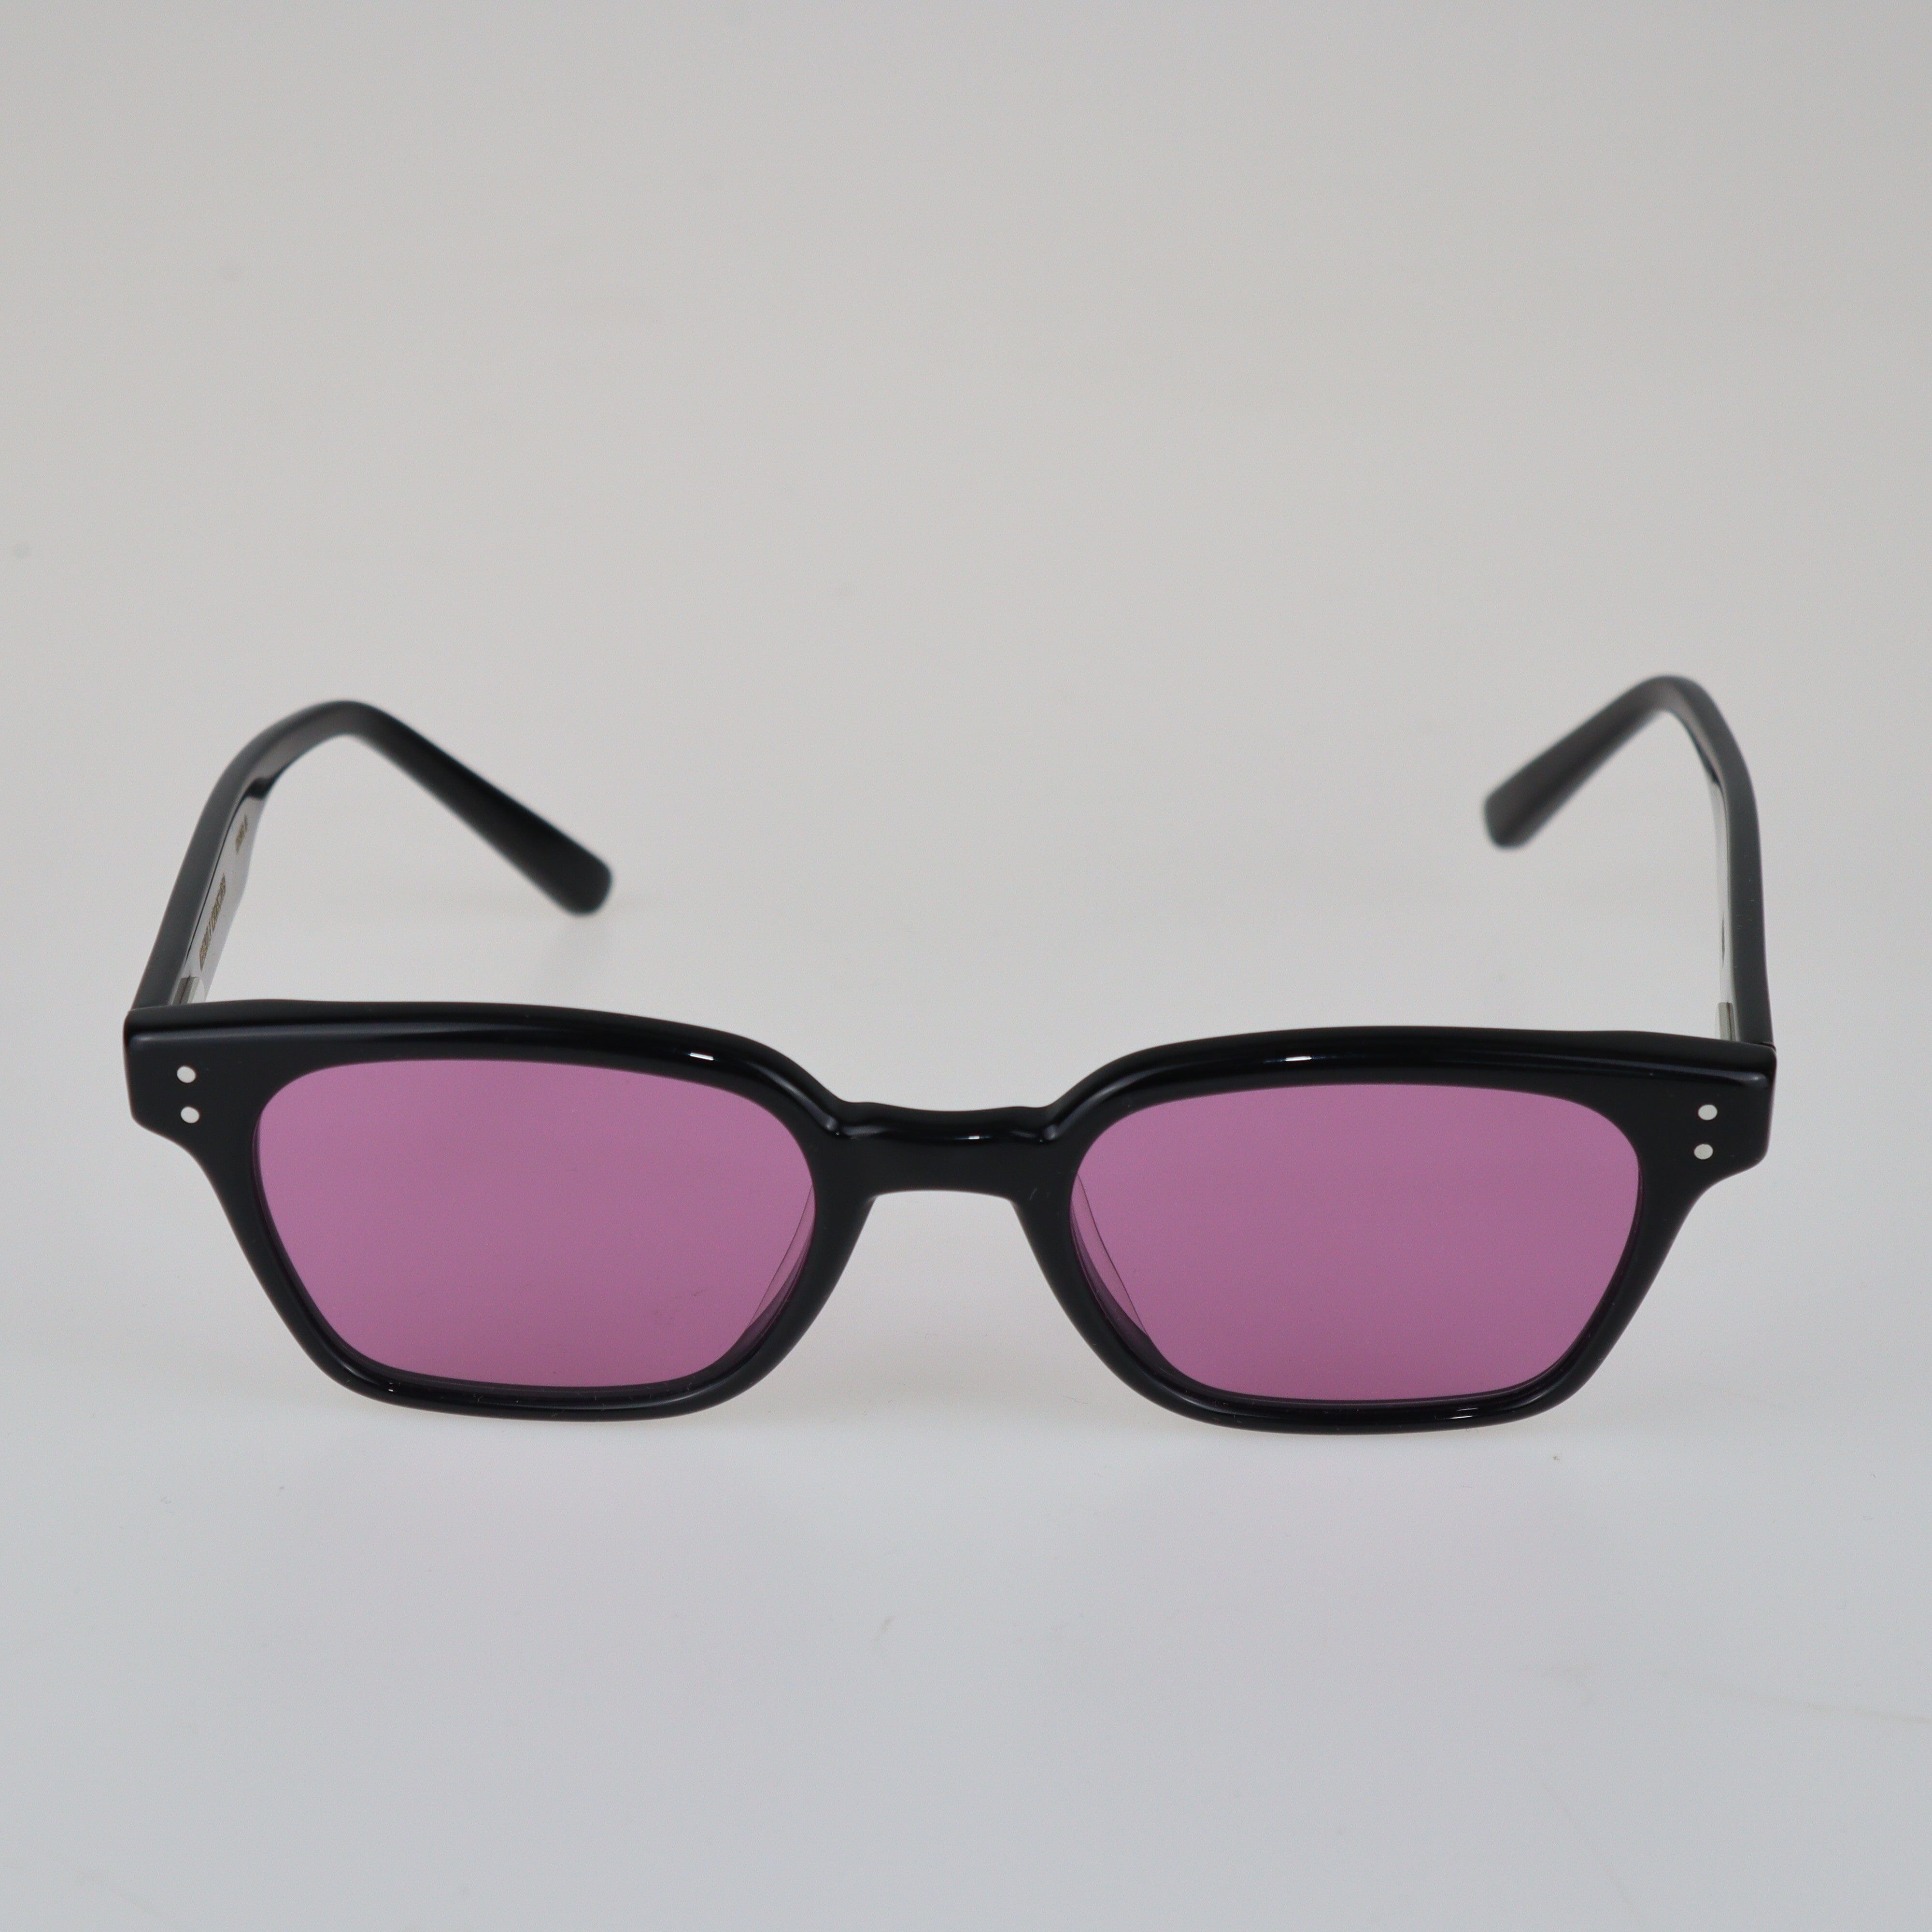 Black/Pink Tinted Square Frame Sunglasses Accessories Gentle Monster 